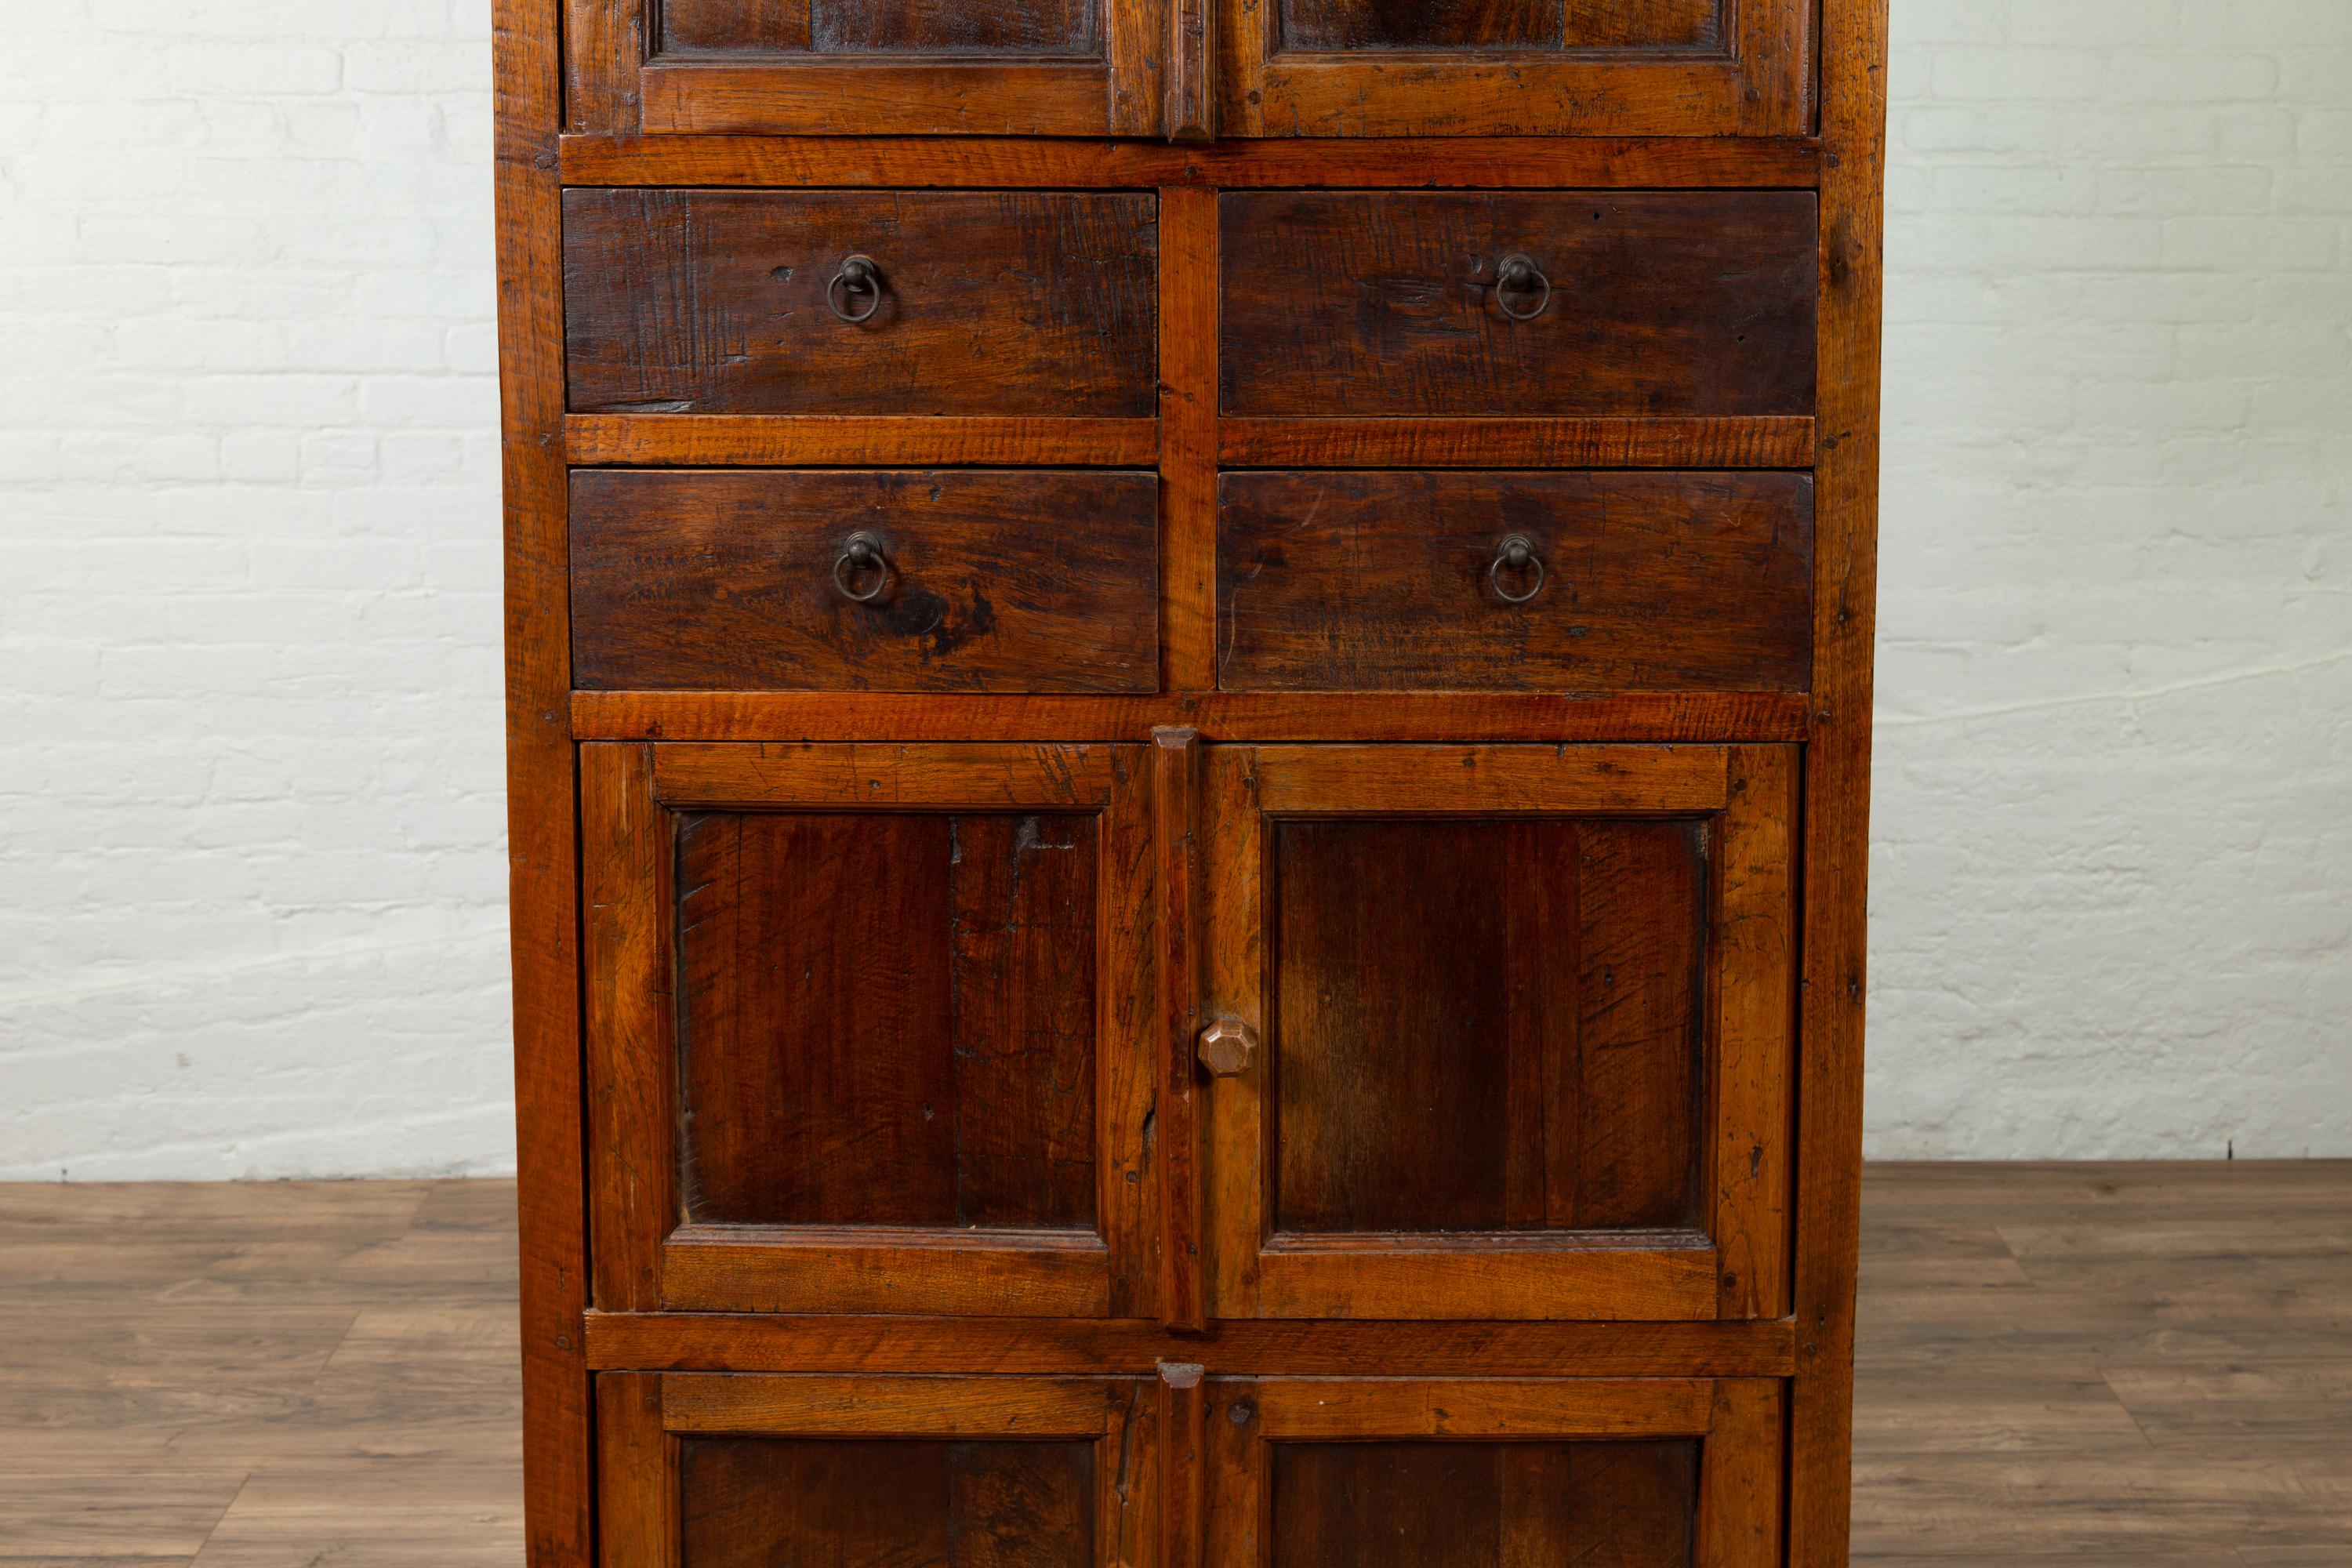 wooden tall cabinet